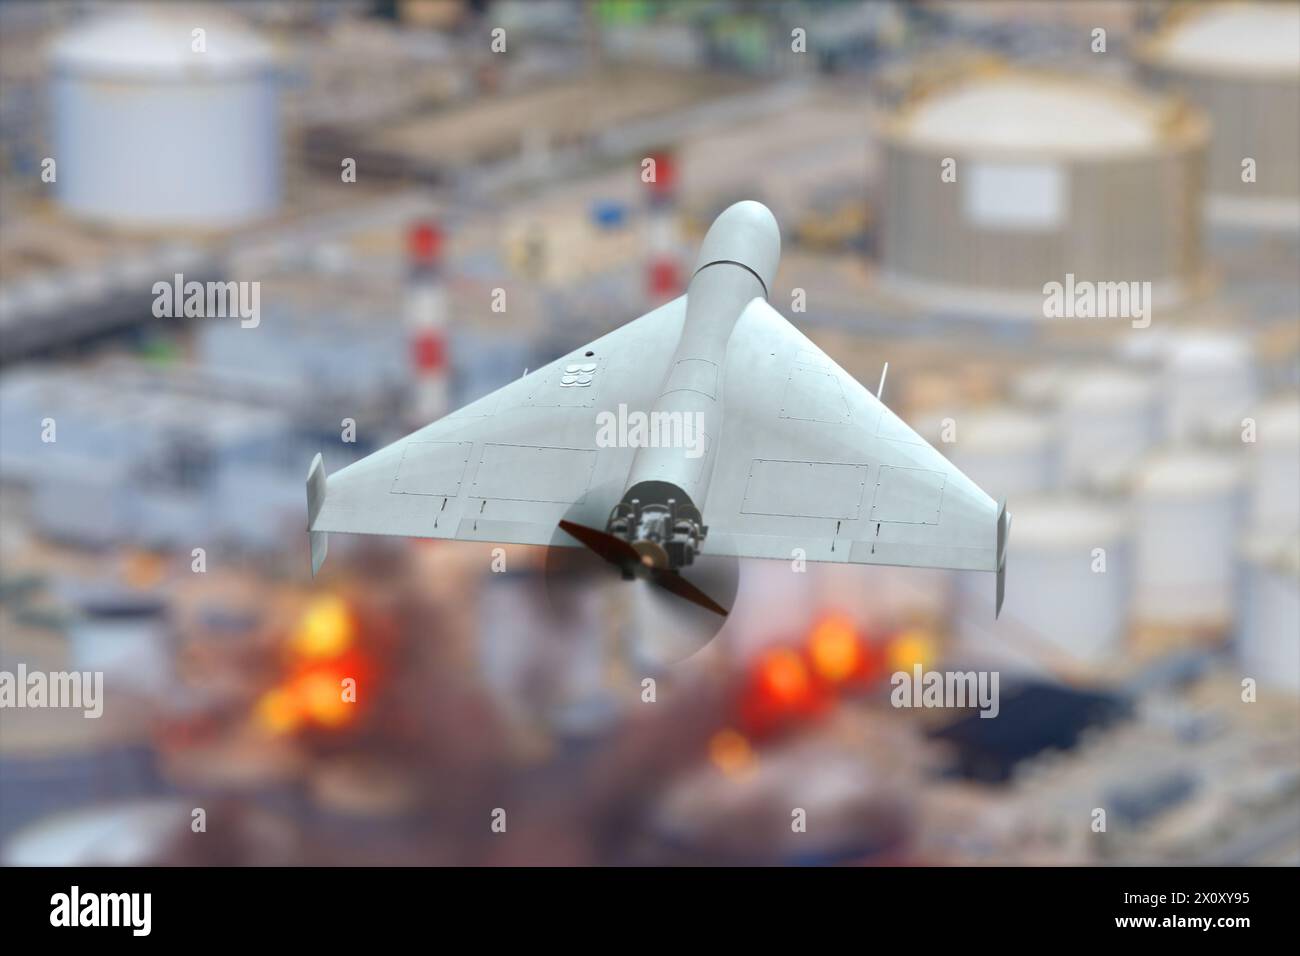 Military drone attack on oil refinery, oil depot fire, explosions and fire. Stock Photo